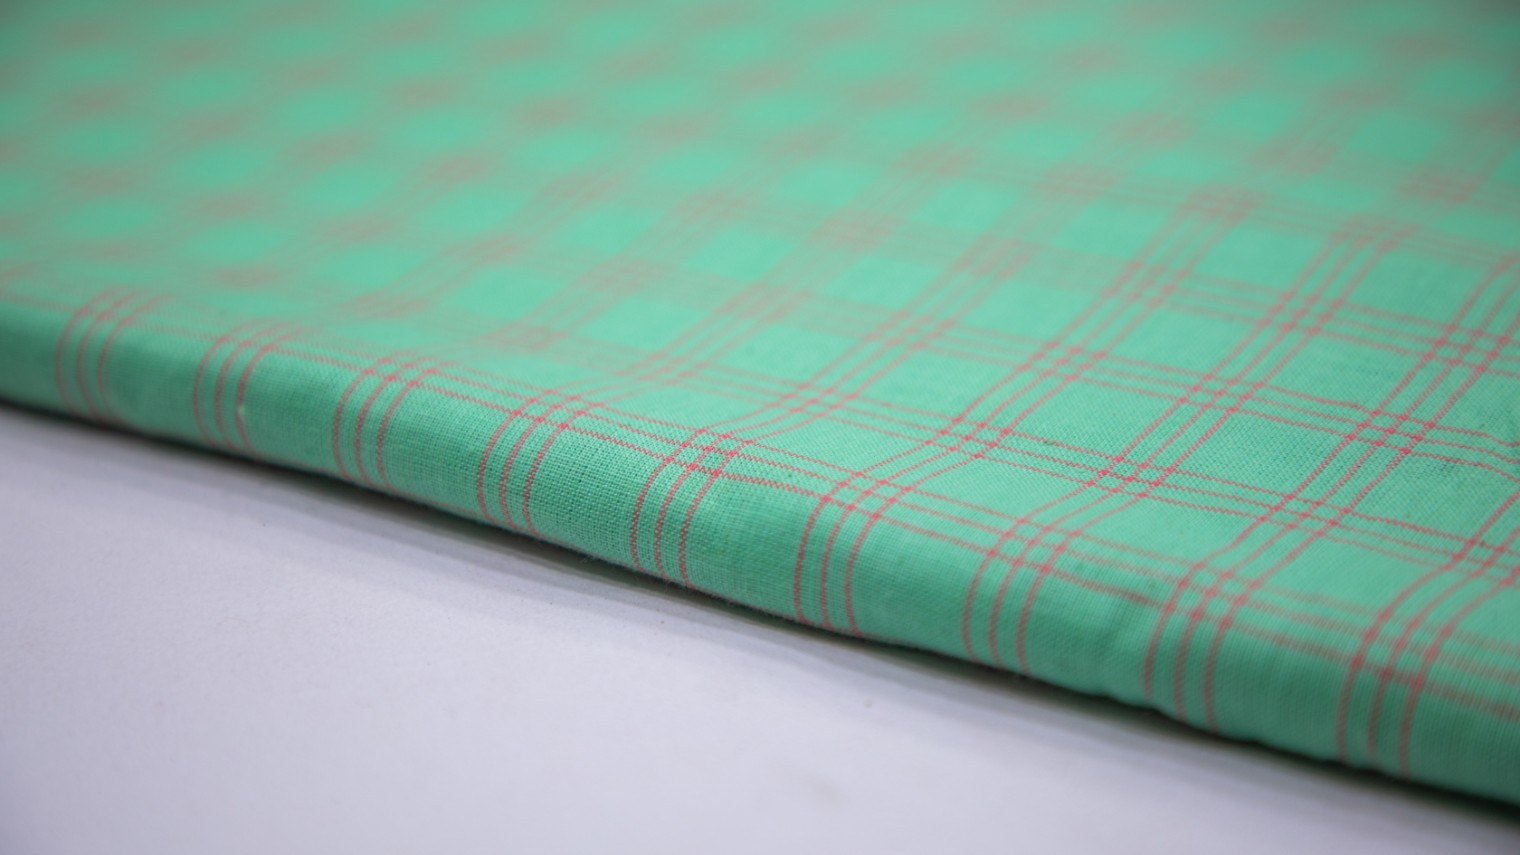 Aqua Green Color South Cotton Handloom Double Chex Pattern Weave Fabric - 4240